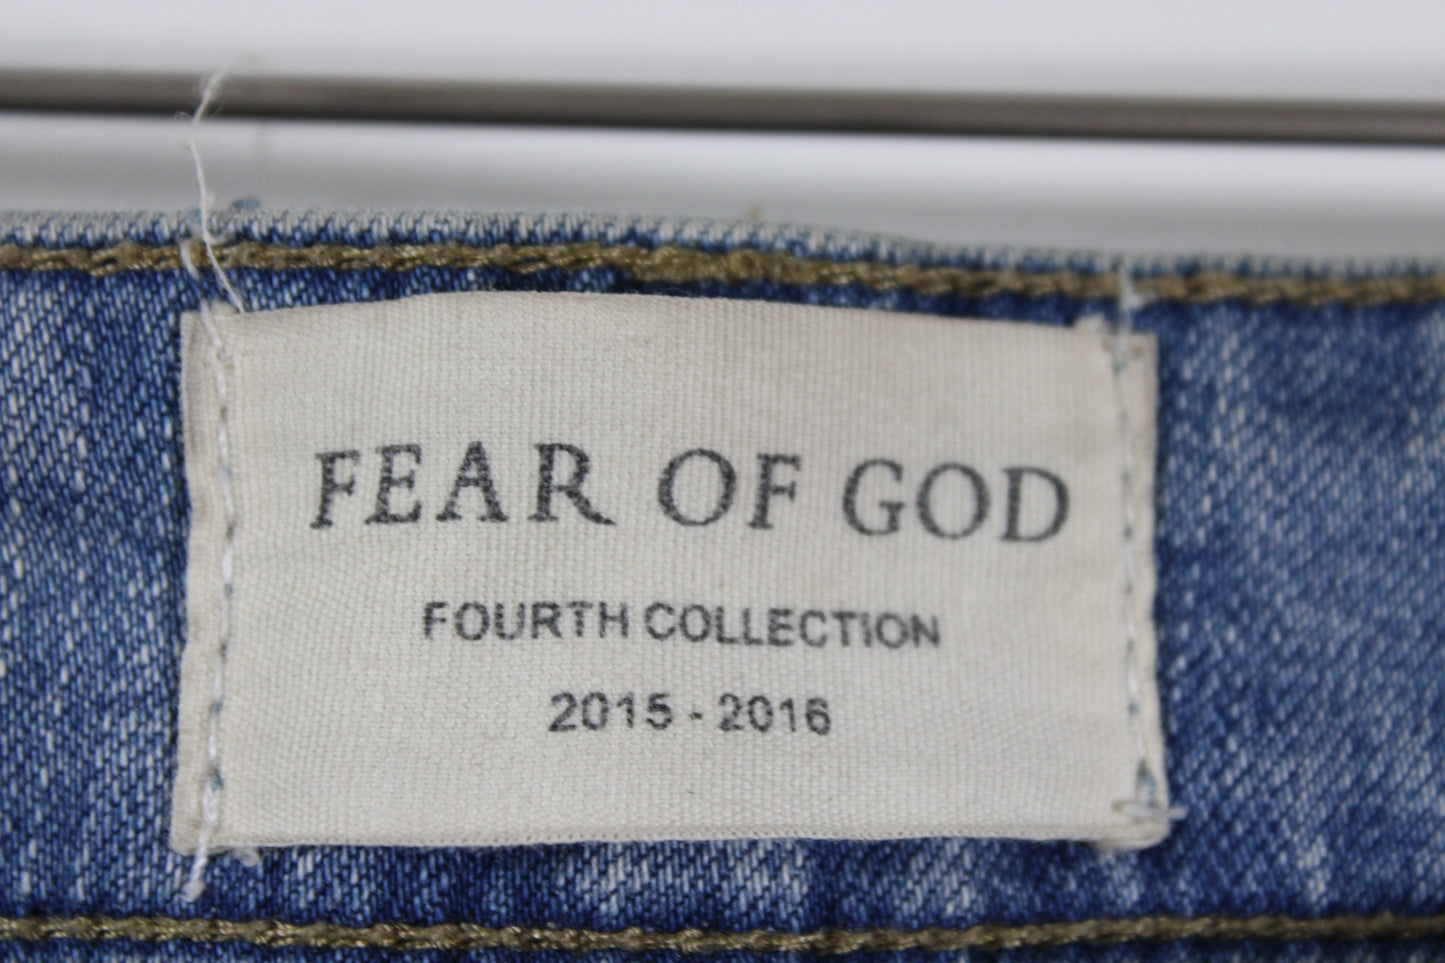 Fear of God Fourth Collection 2015-2016 Jeans